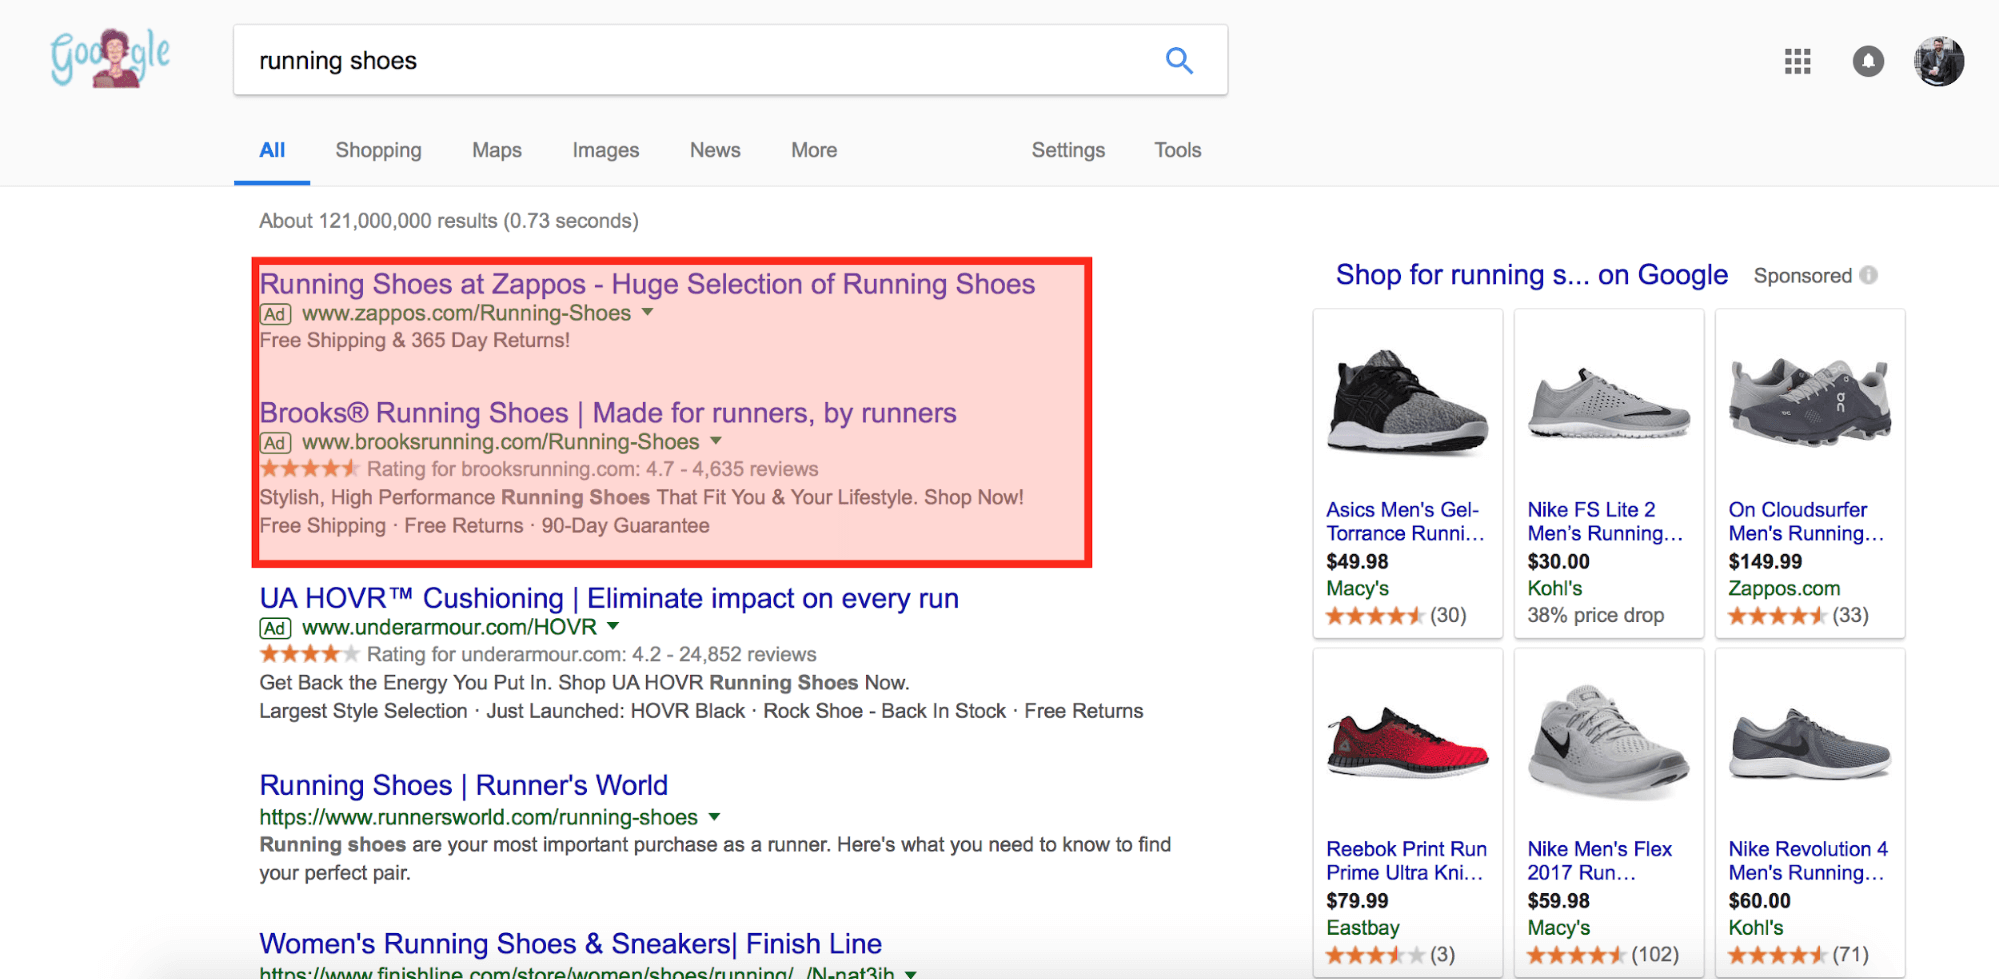 google search result with ads for running shoes